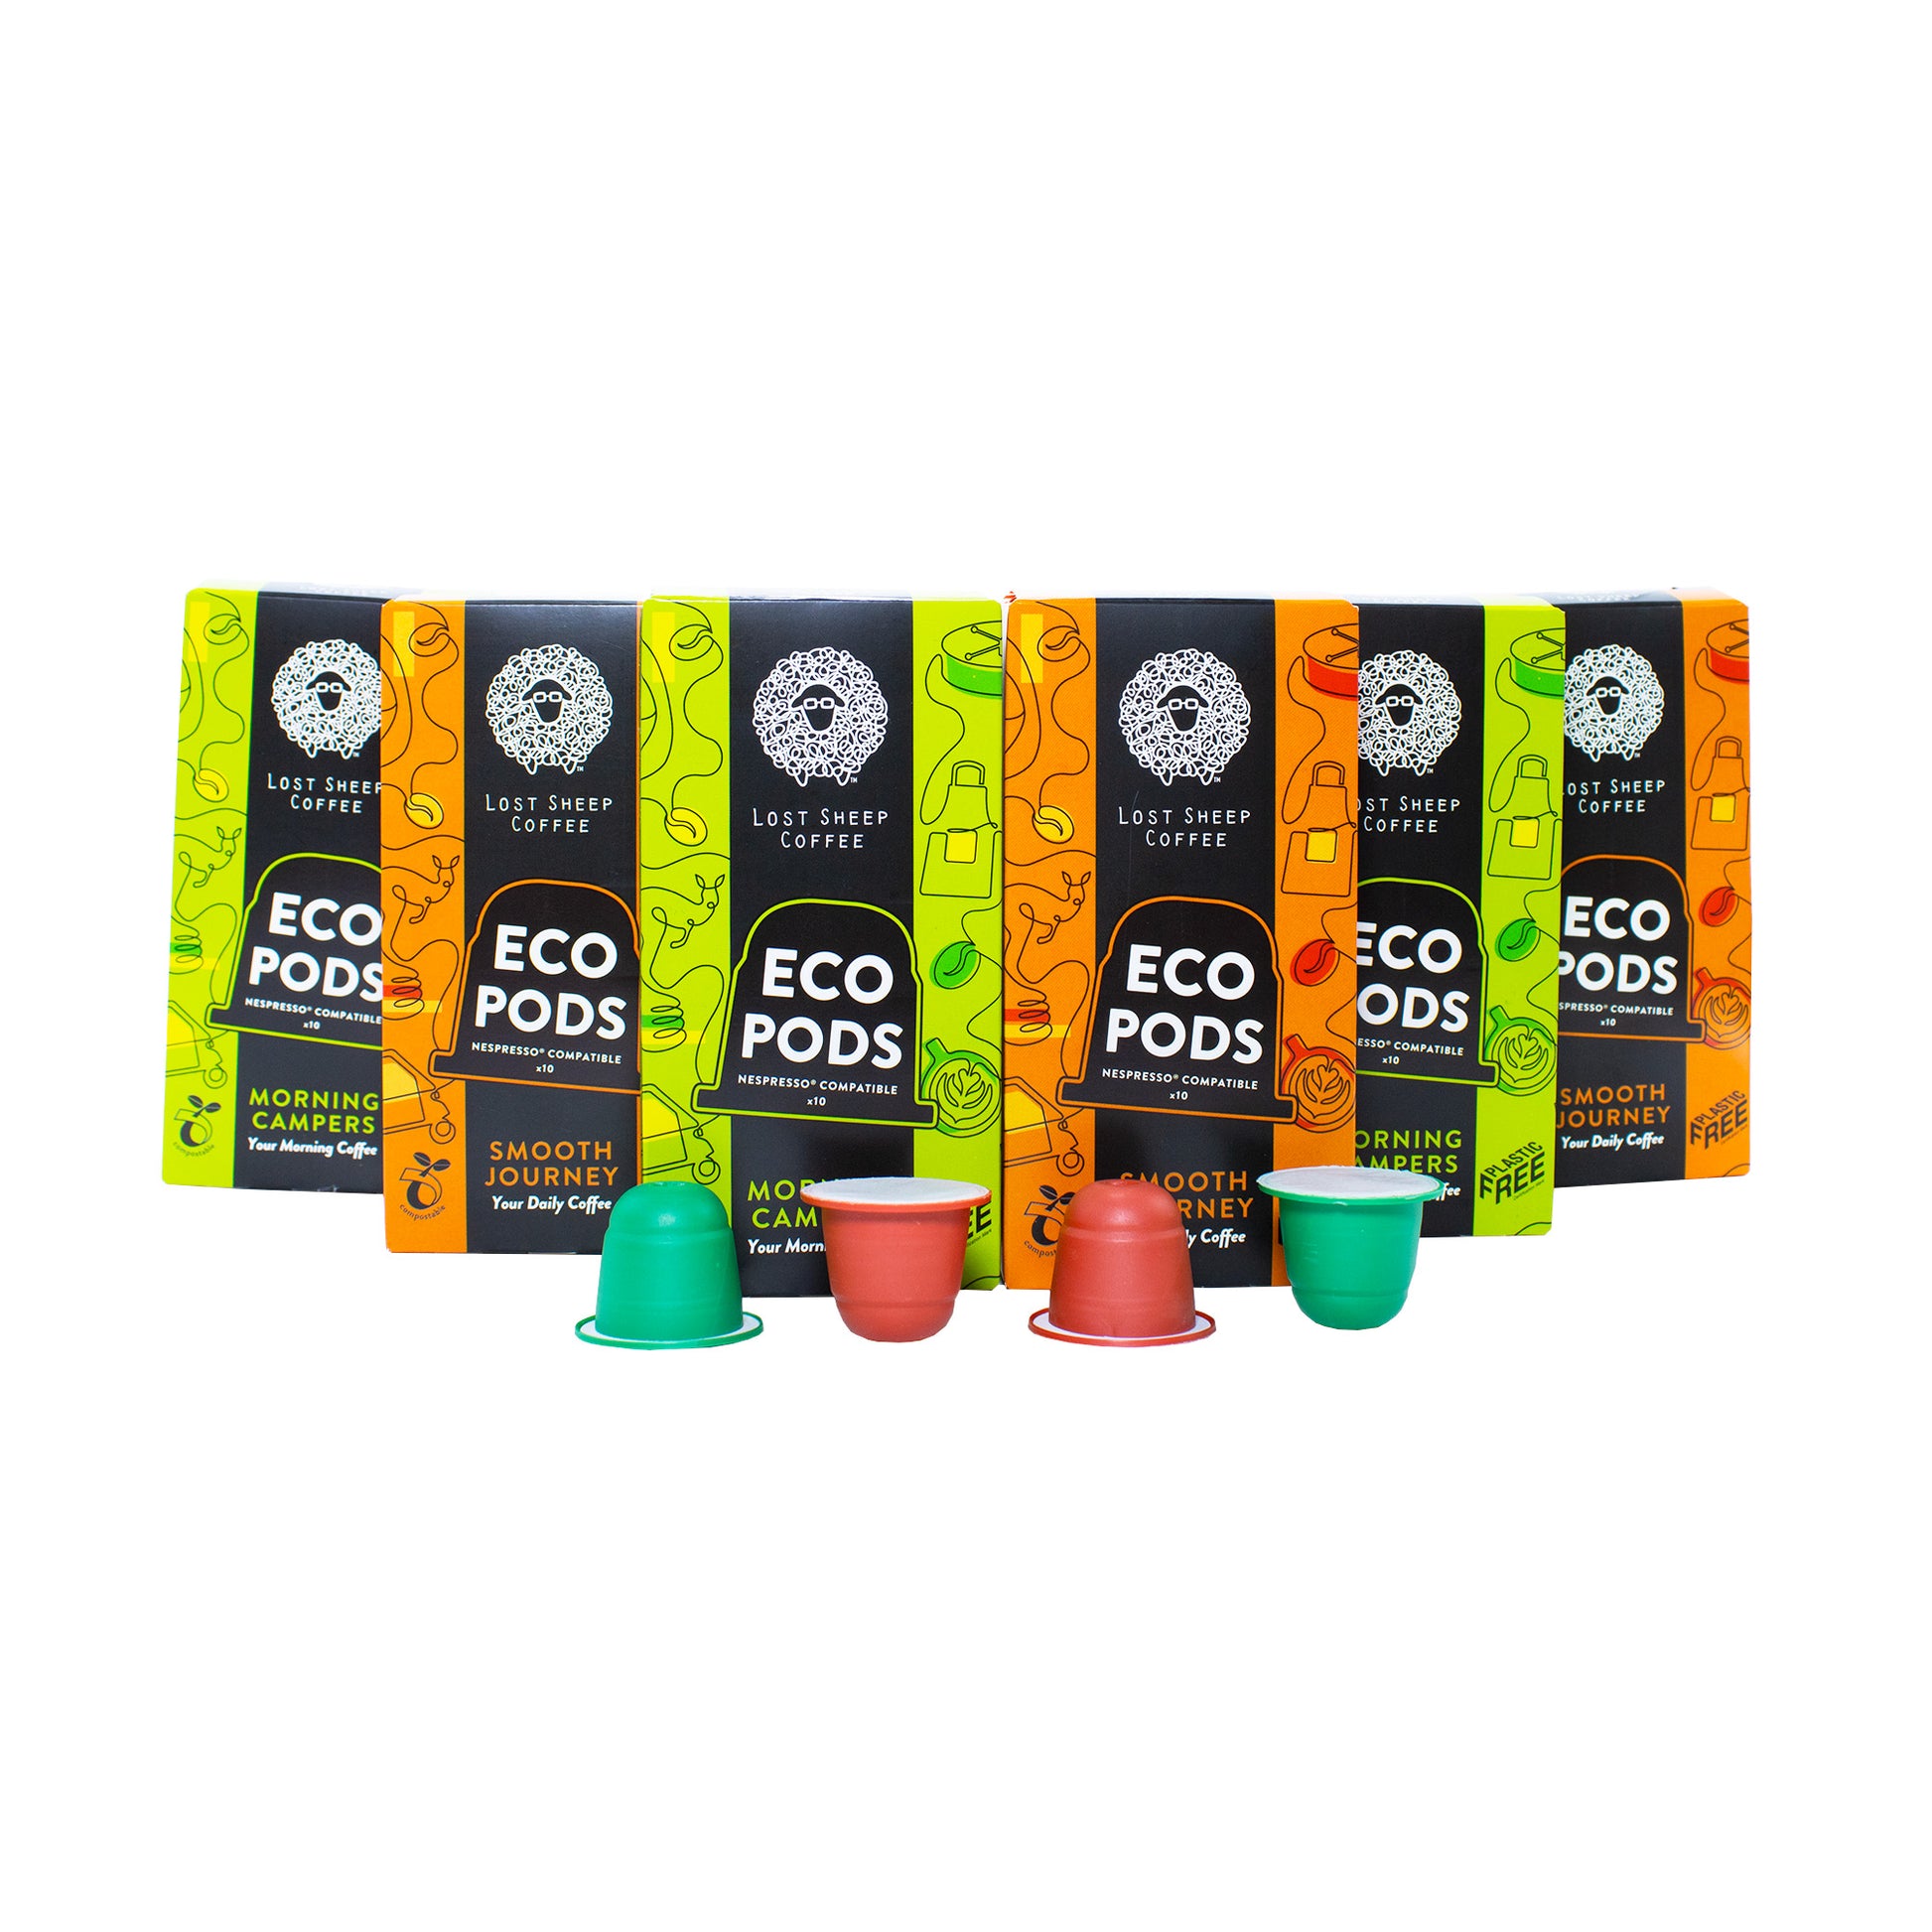 Lost Sheep Coffee eco pods selection